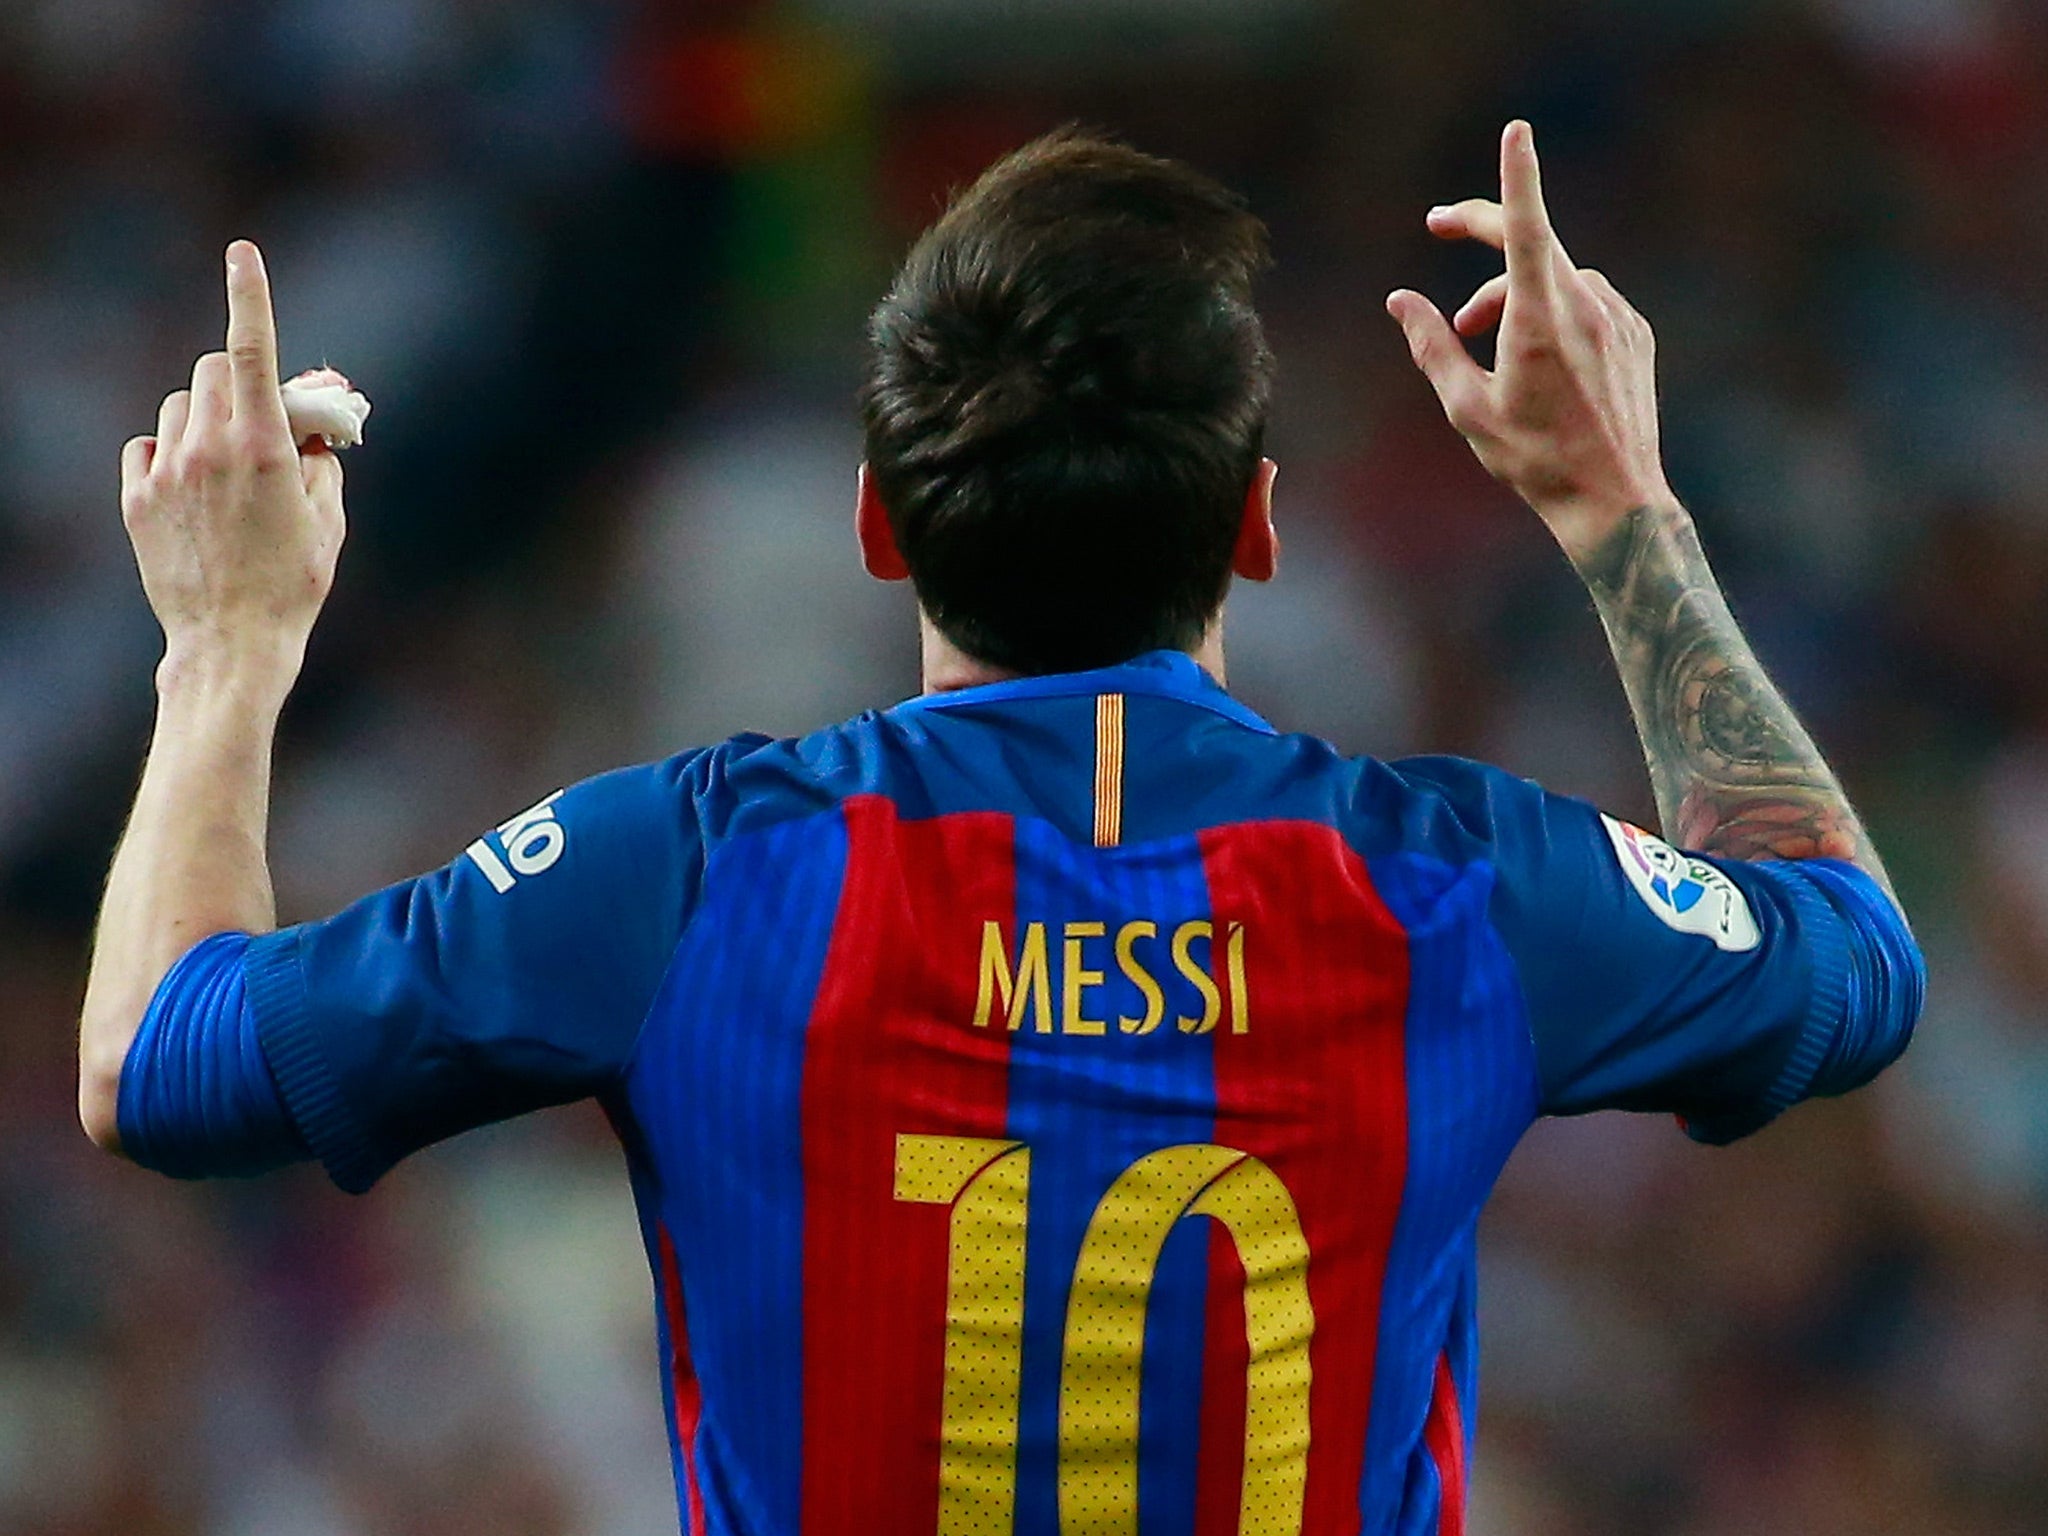 Lionel Messi scored a dramatic late winner to shake up La Liga's title race